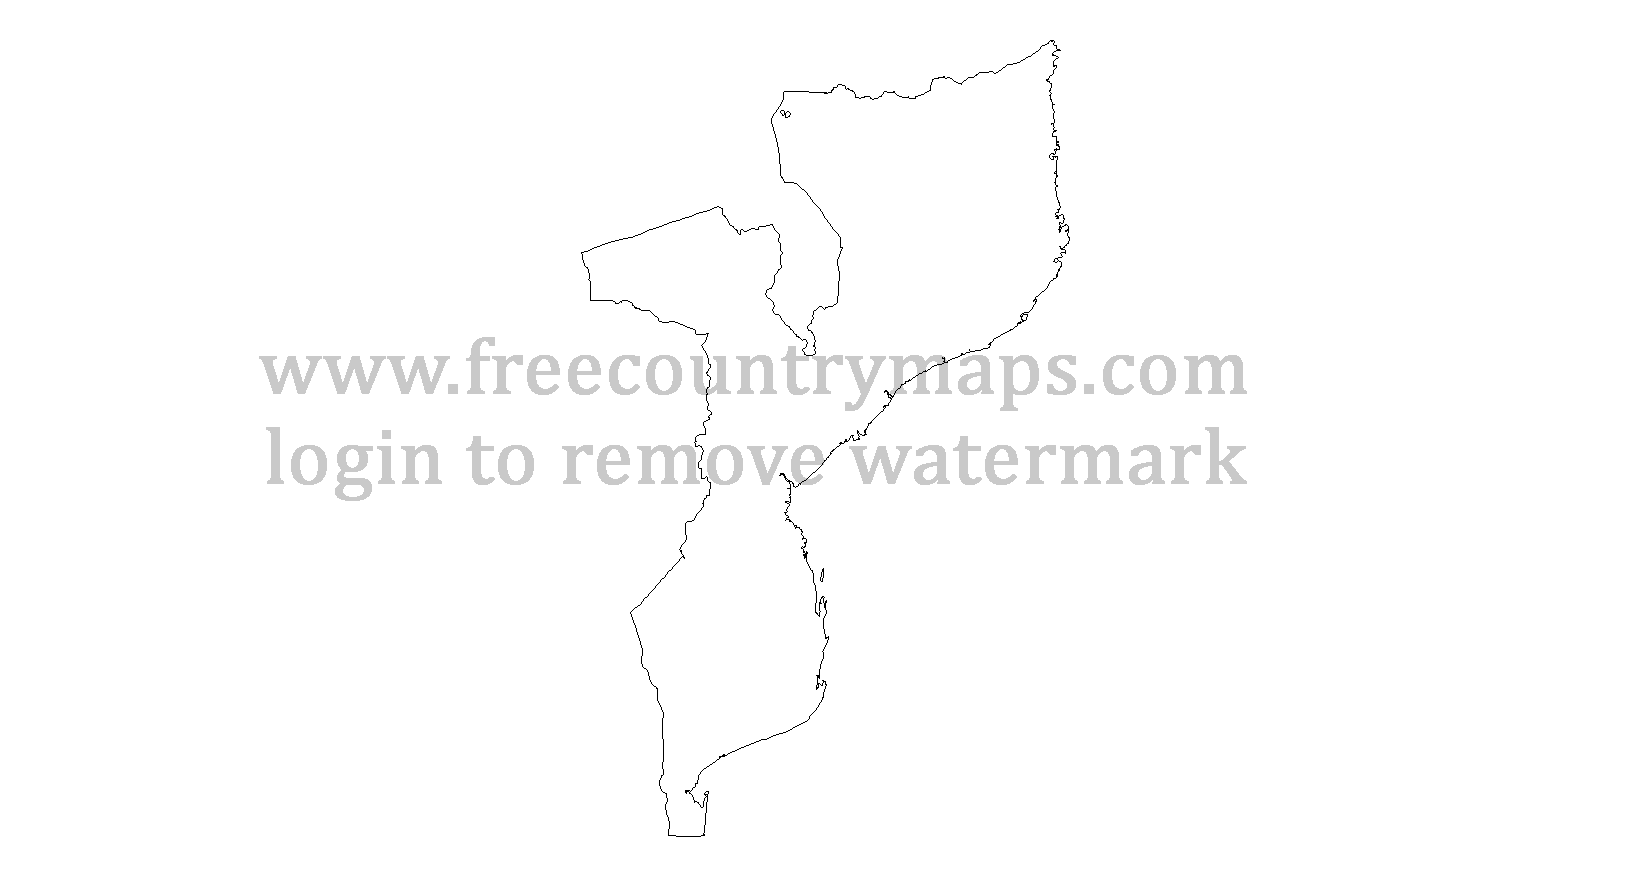 Mozambique Outline Map : Mercator